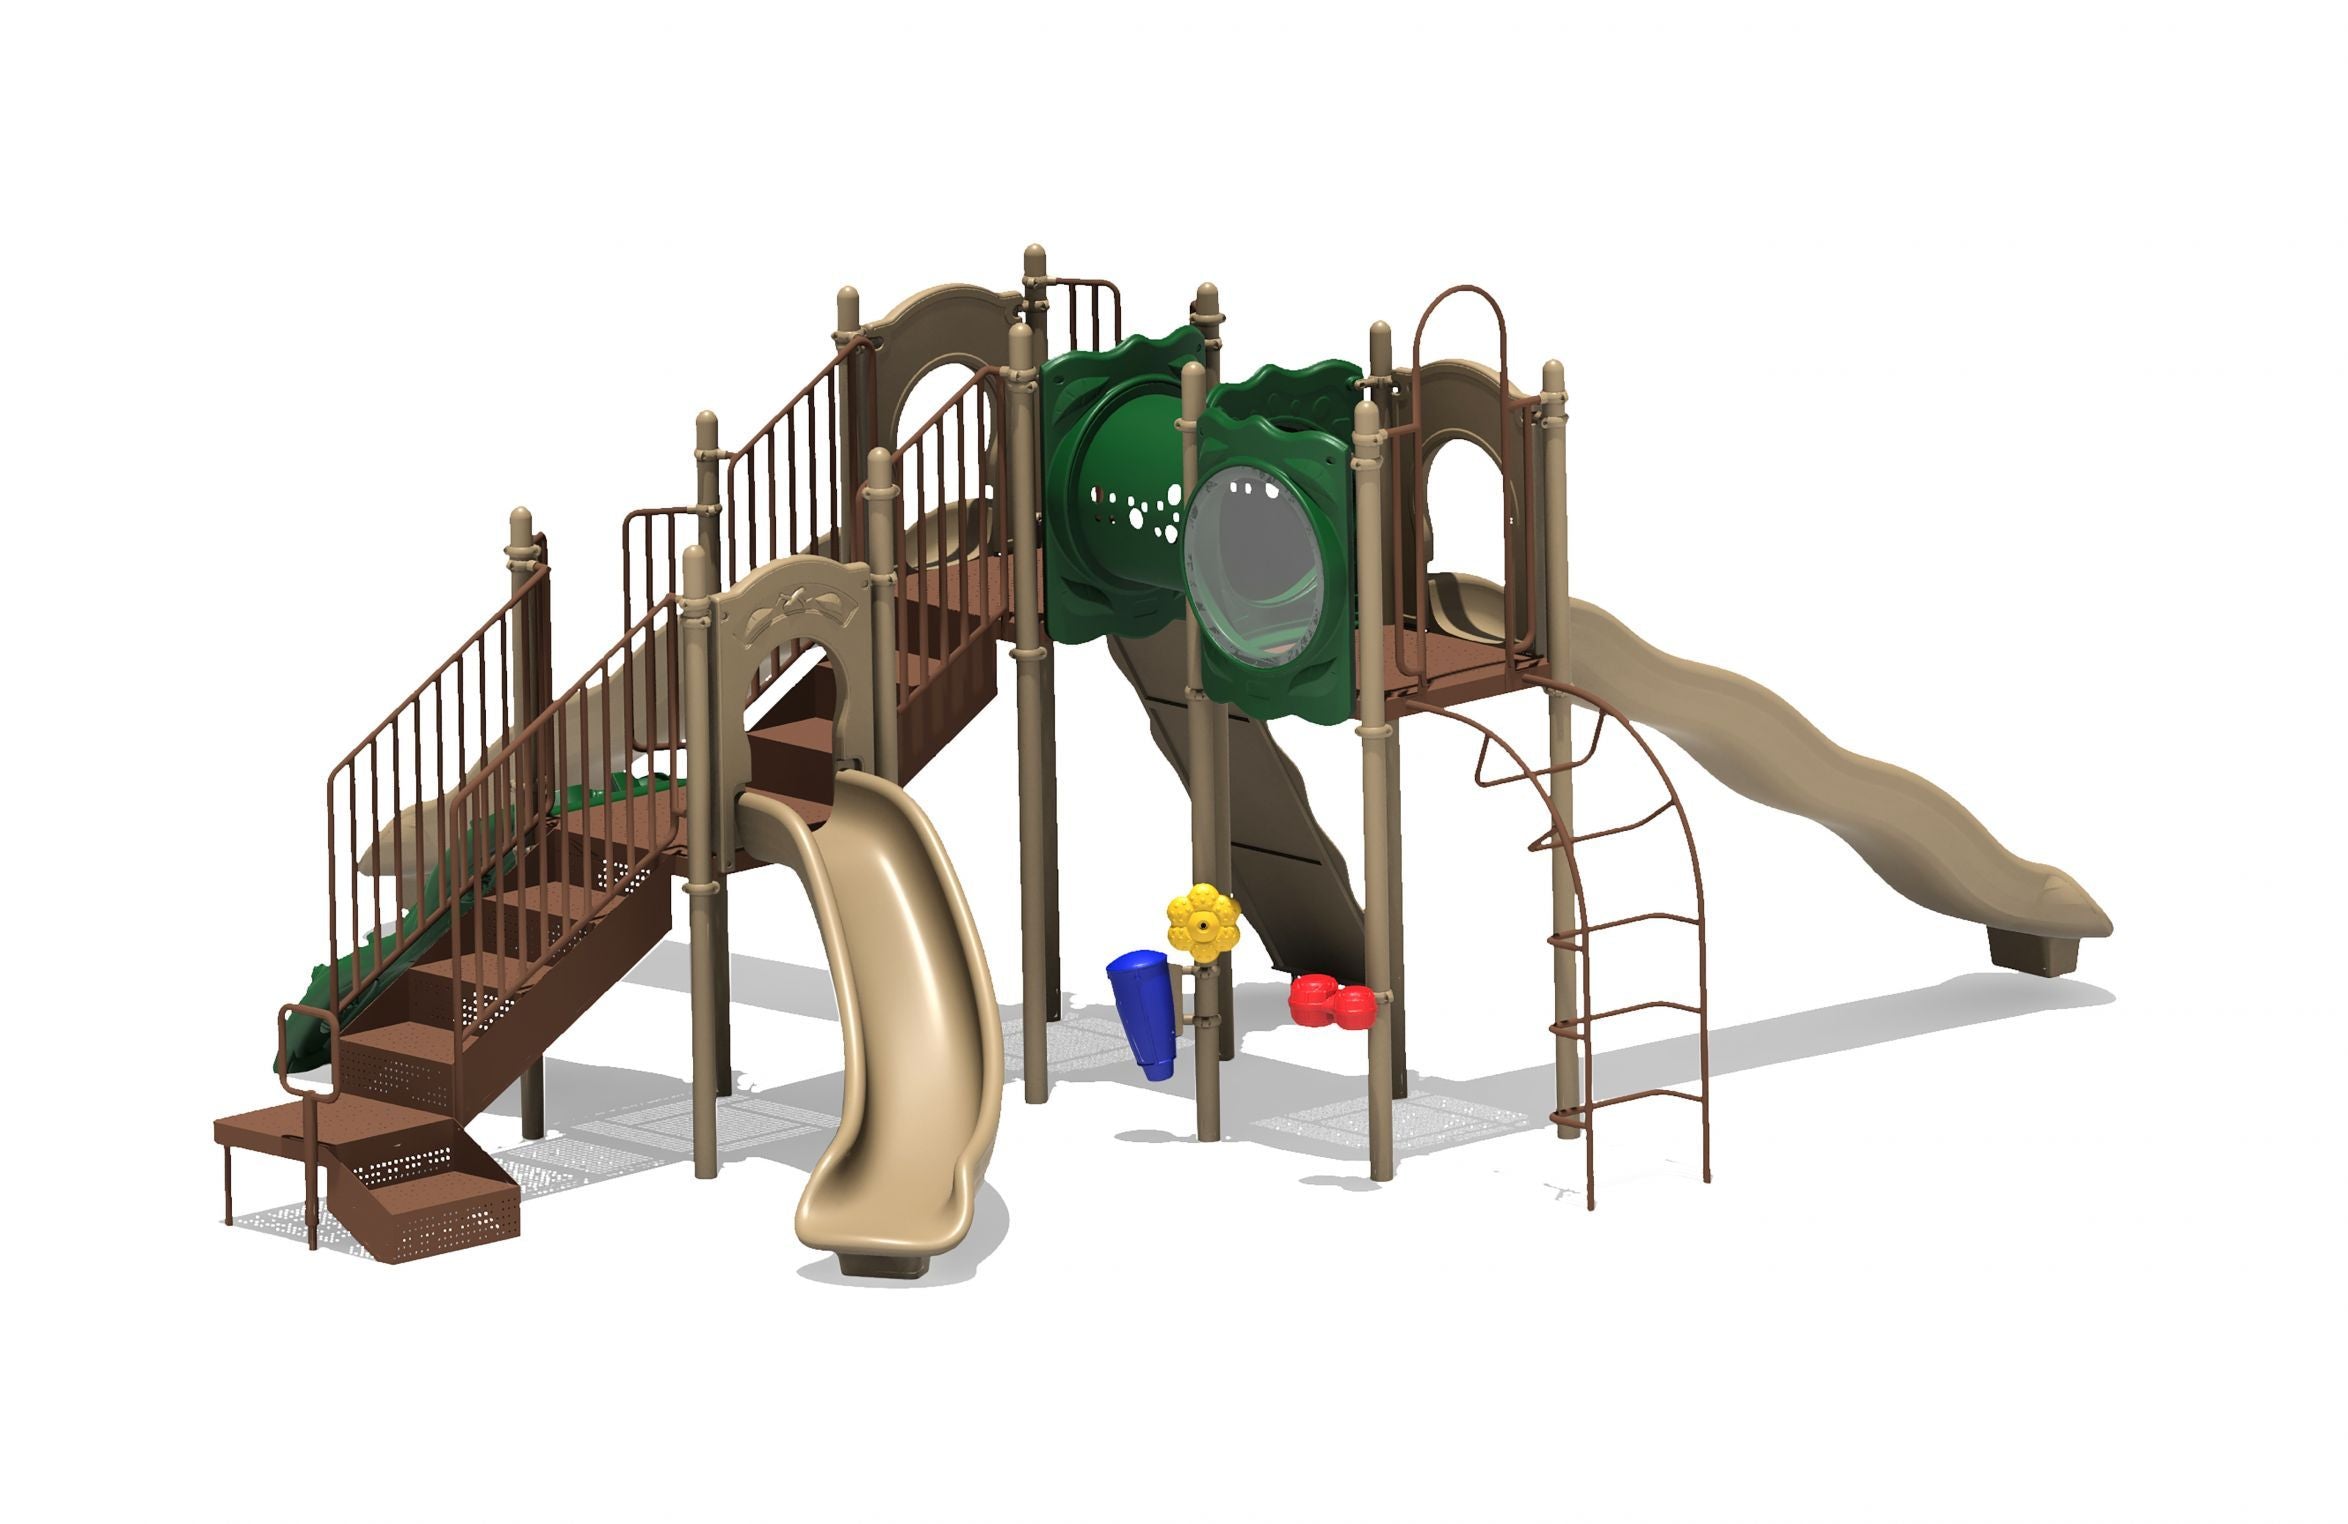 Boulder Point Playsystem | Playground Equipment with Slide & Climbing Wall